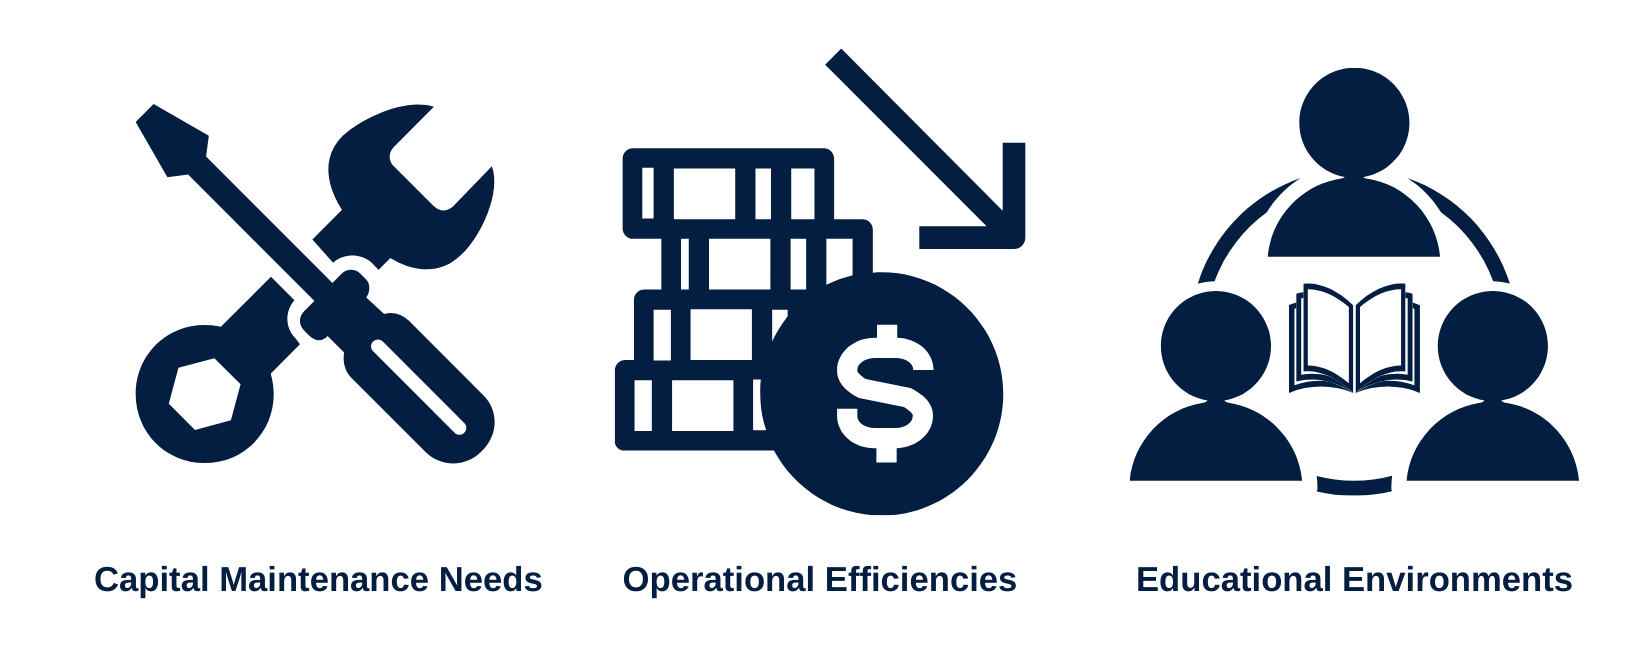 Maintenance Operational Efficiencies and Learning